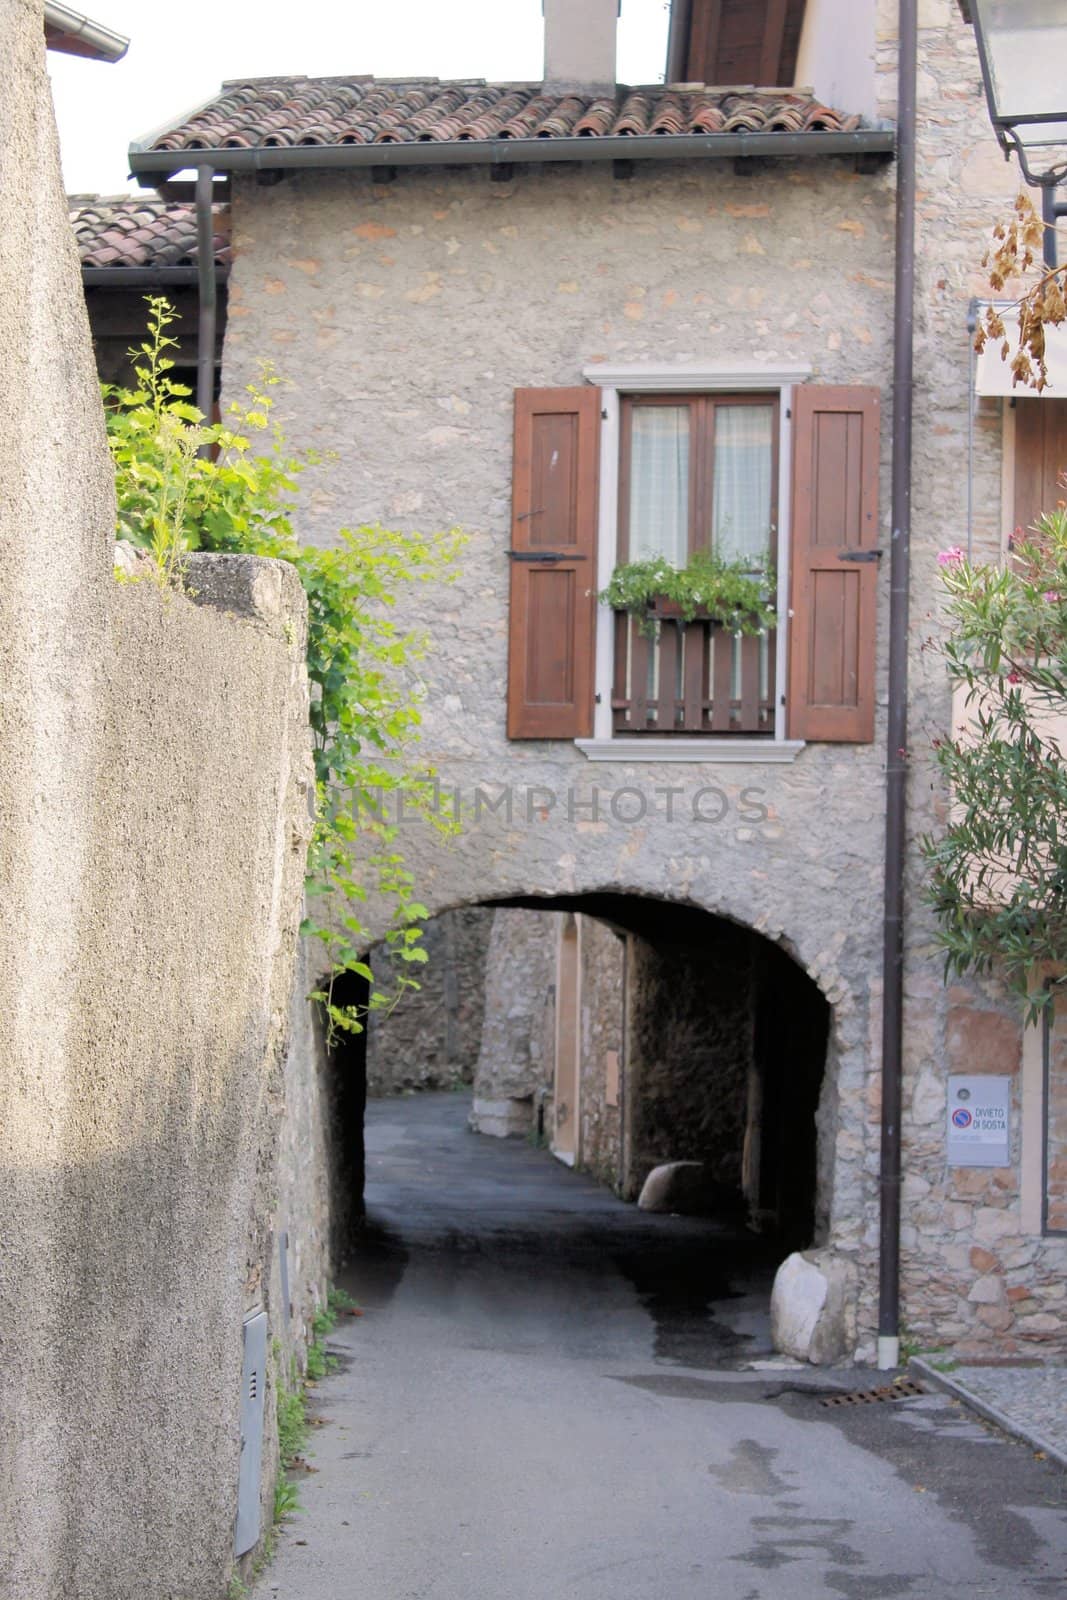 Cecina, small medieval village on Garda lake in northern Italy